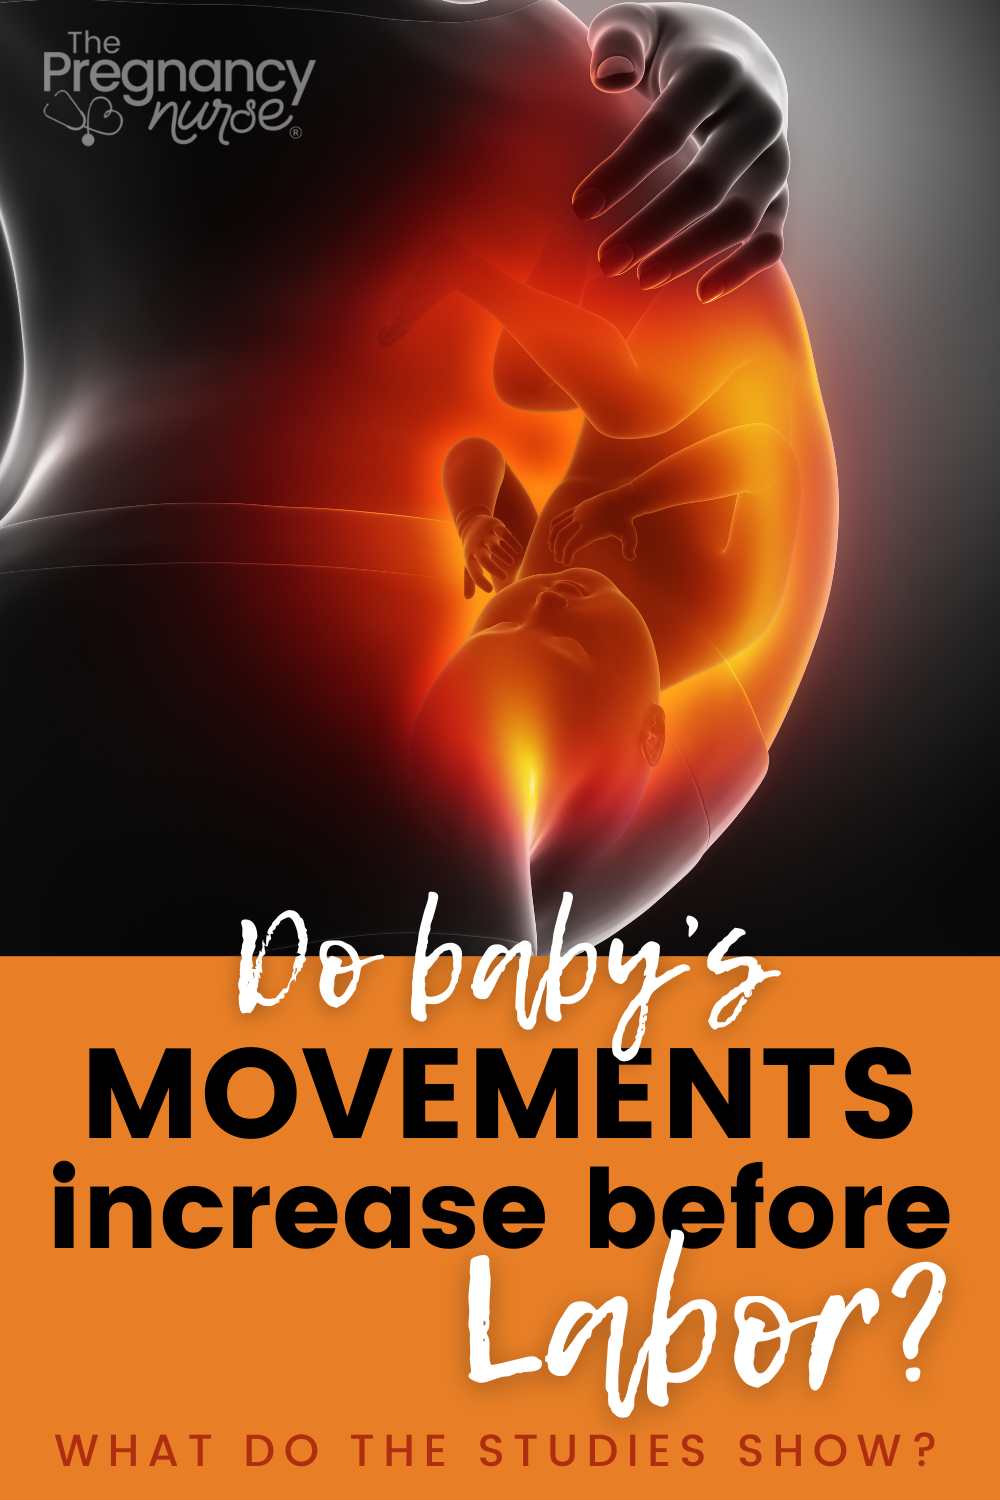 Do you notice increased baby movements as the due date comes closer? Is this a sign that you are going into labor? Here is a comprehensive guide to understanding fetal activities before delivery day. Learn why so many pregnant women notice increased movement and what it might mean for your baby’s wellbeing.